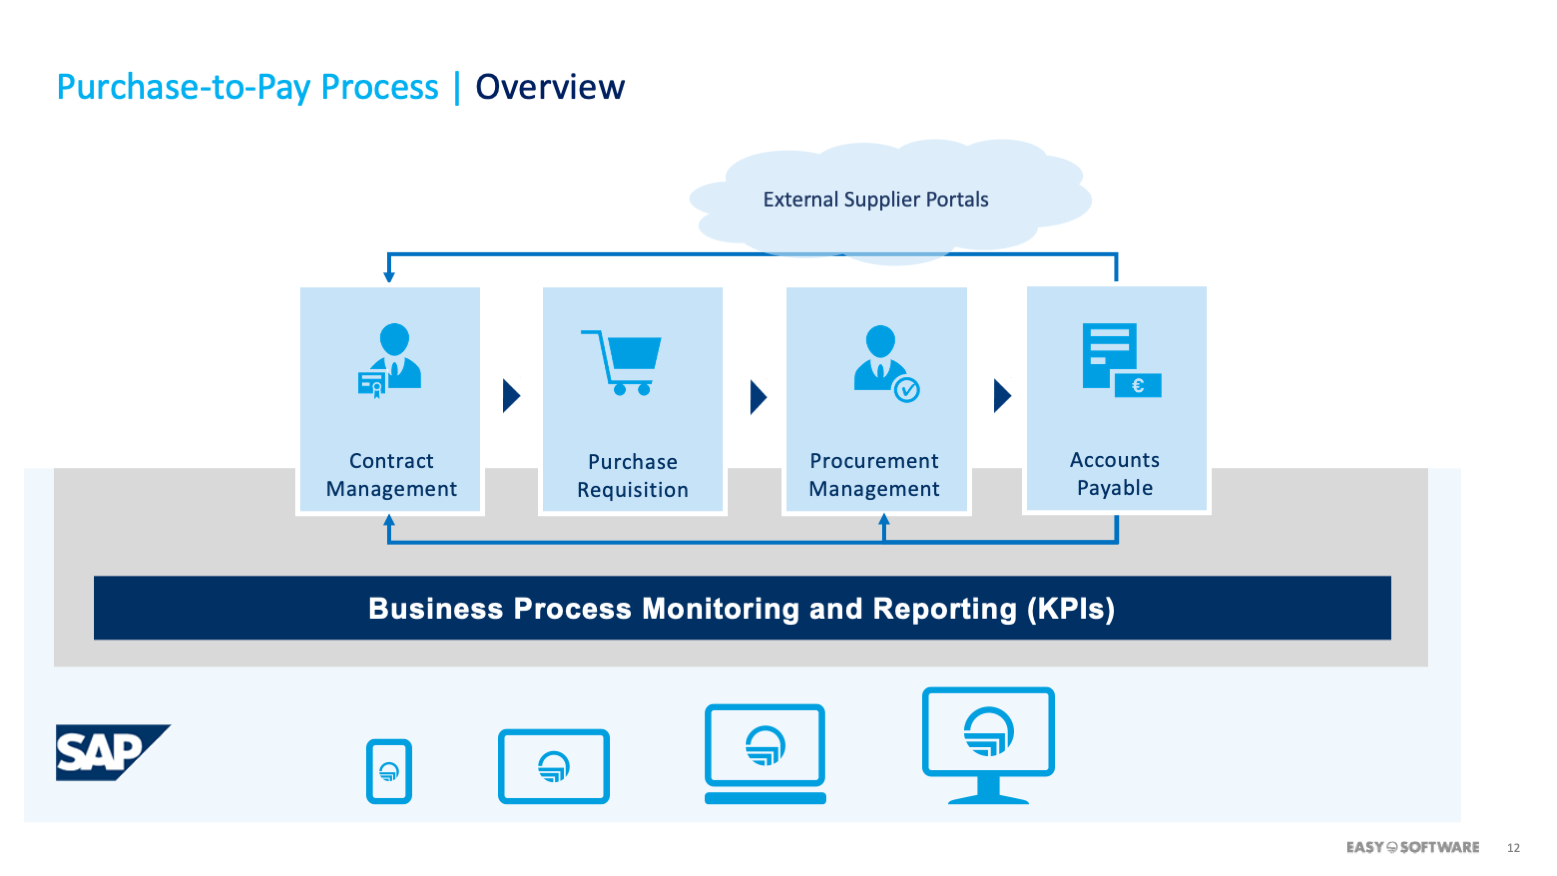 Overview of P2P SAP®